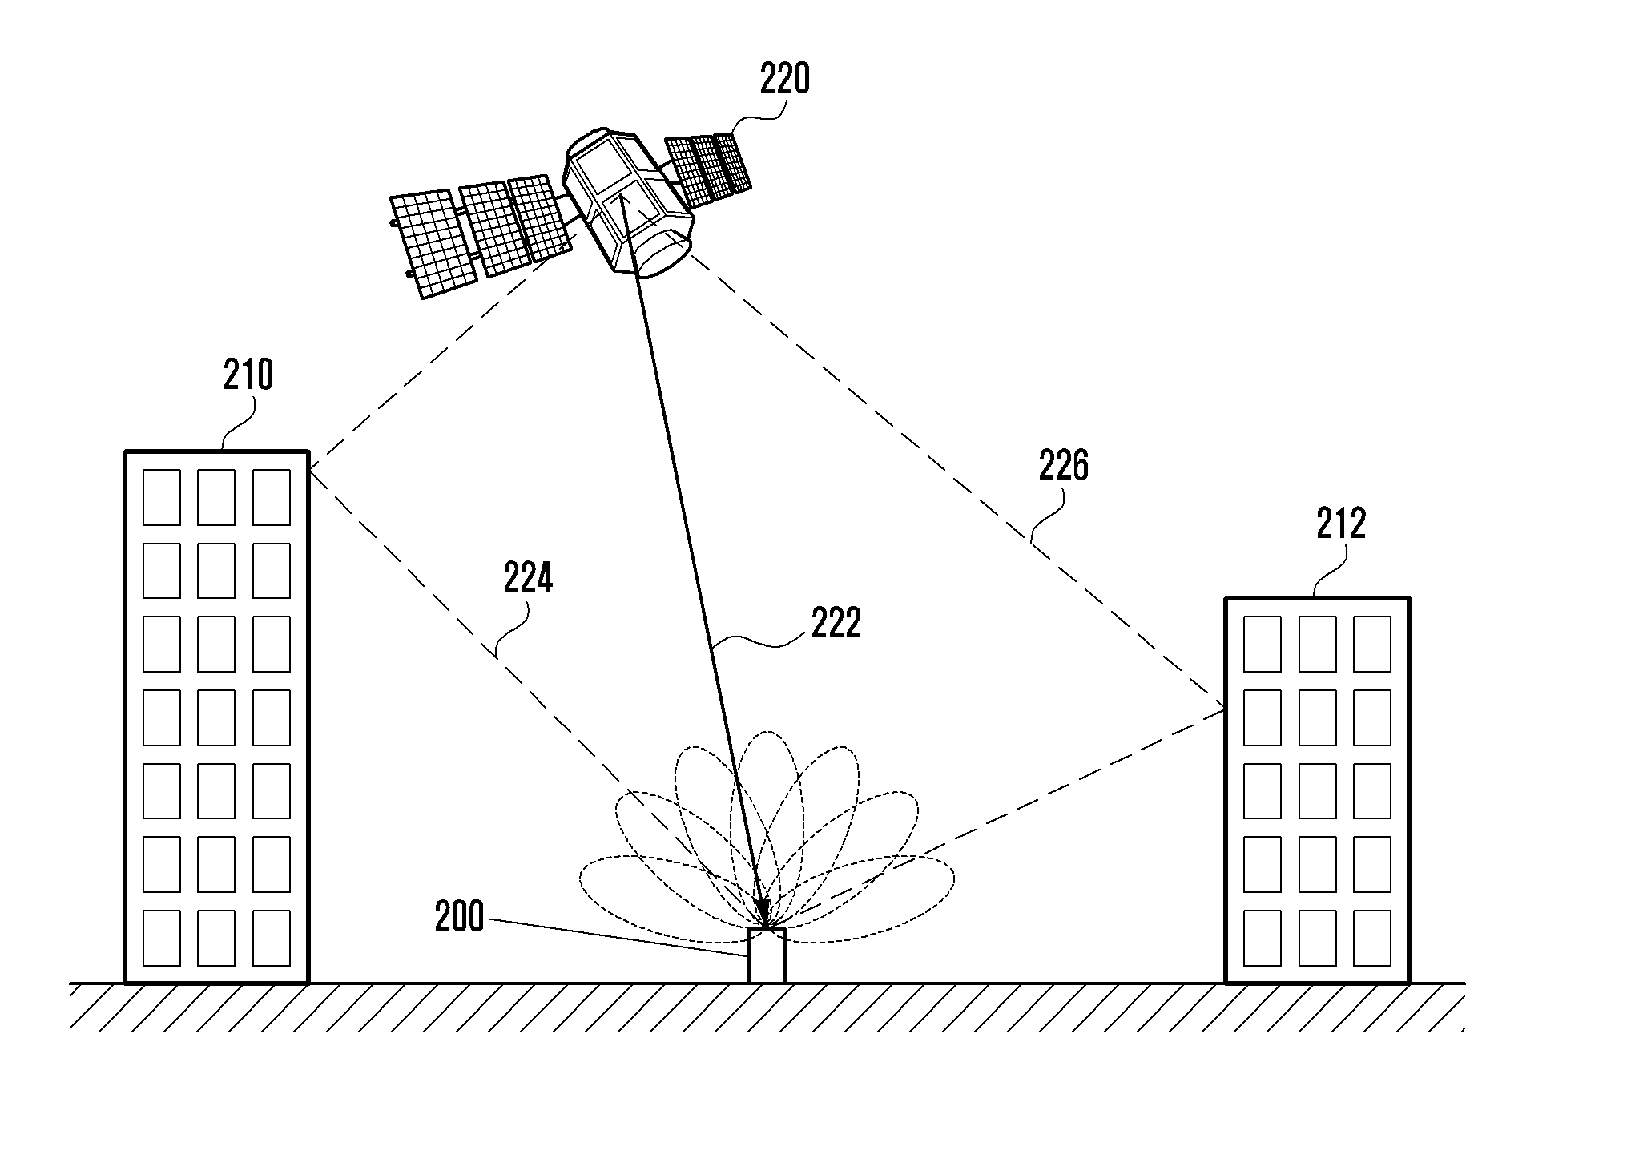 Multipath mitigation in positioning systems